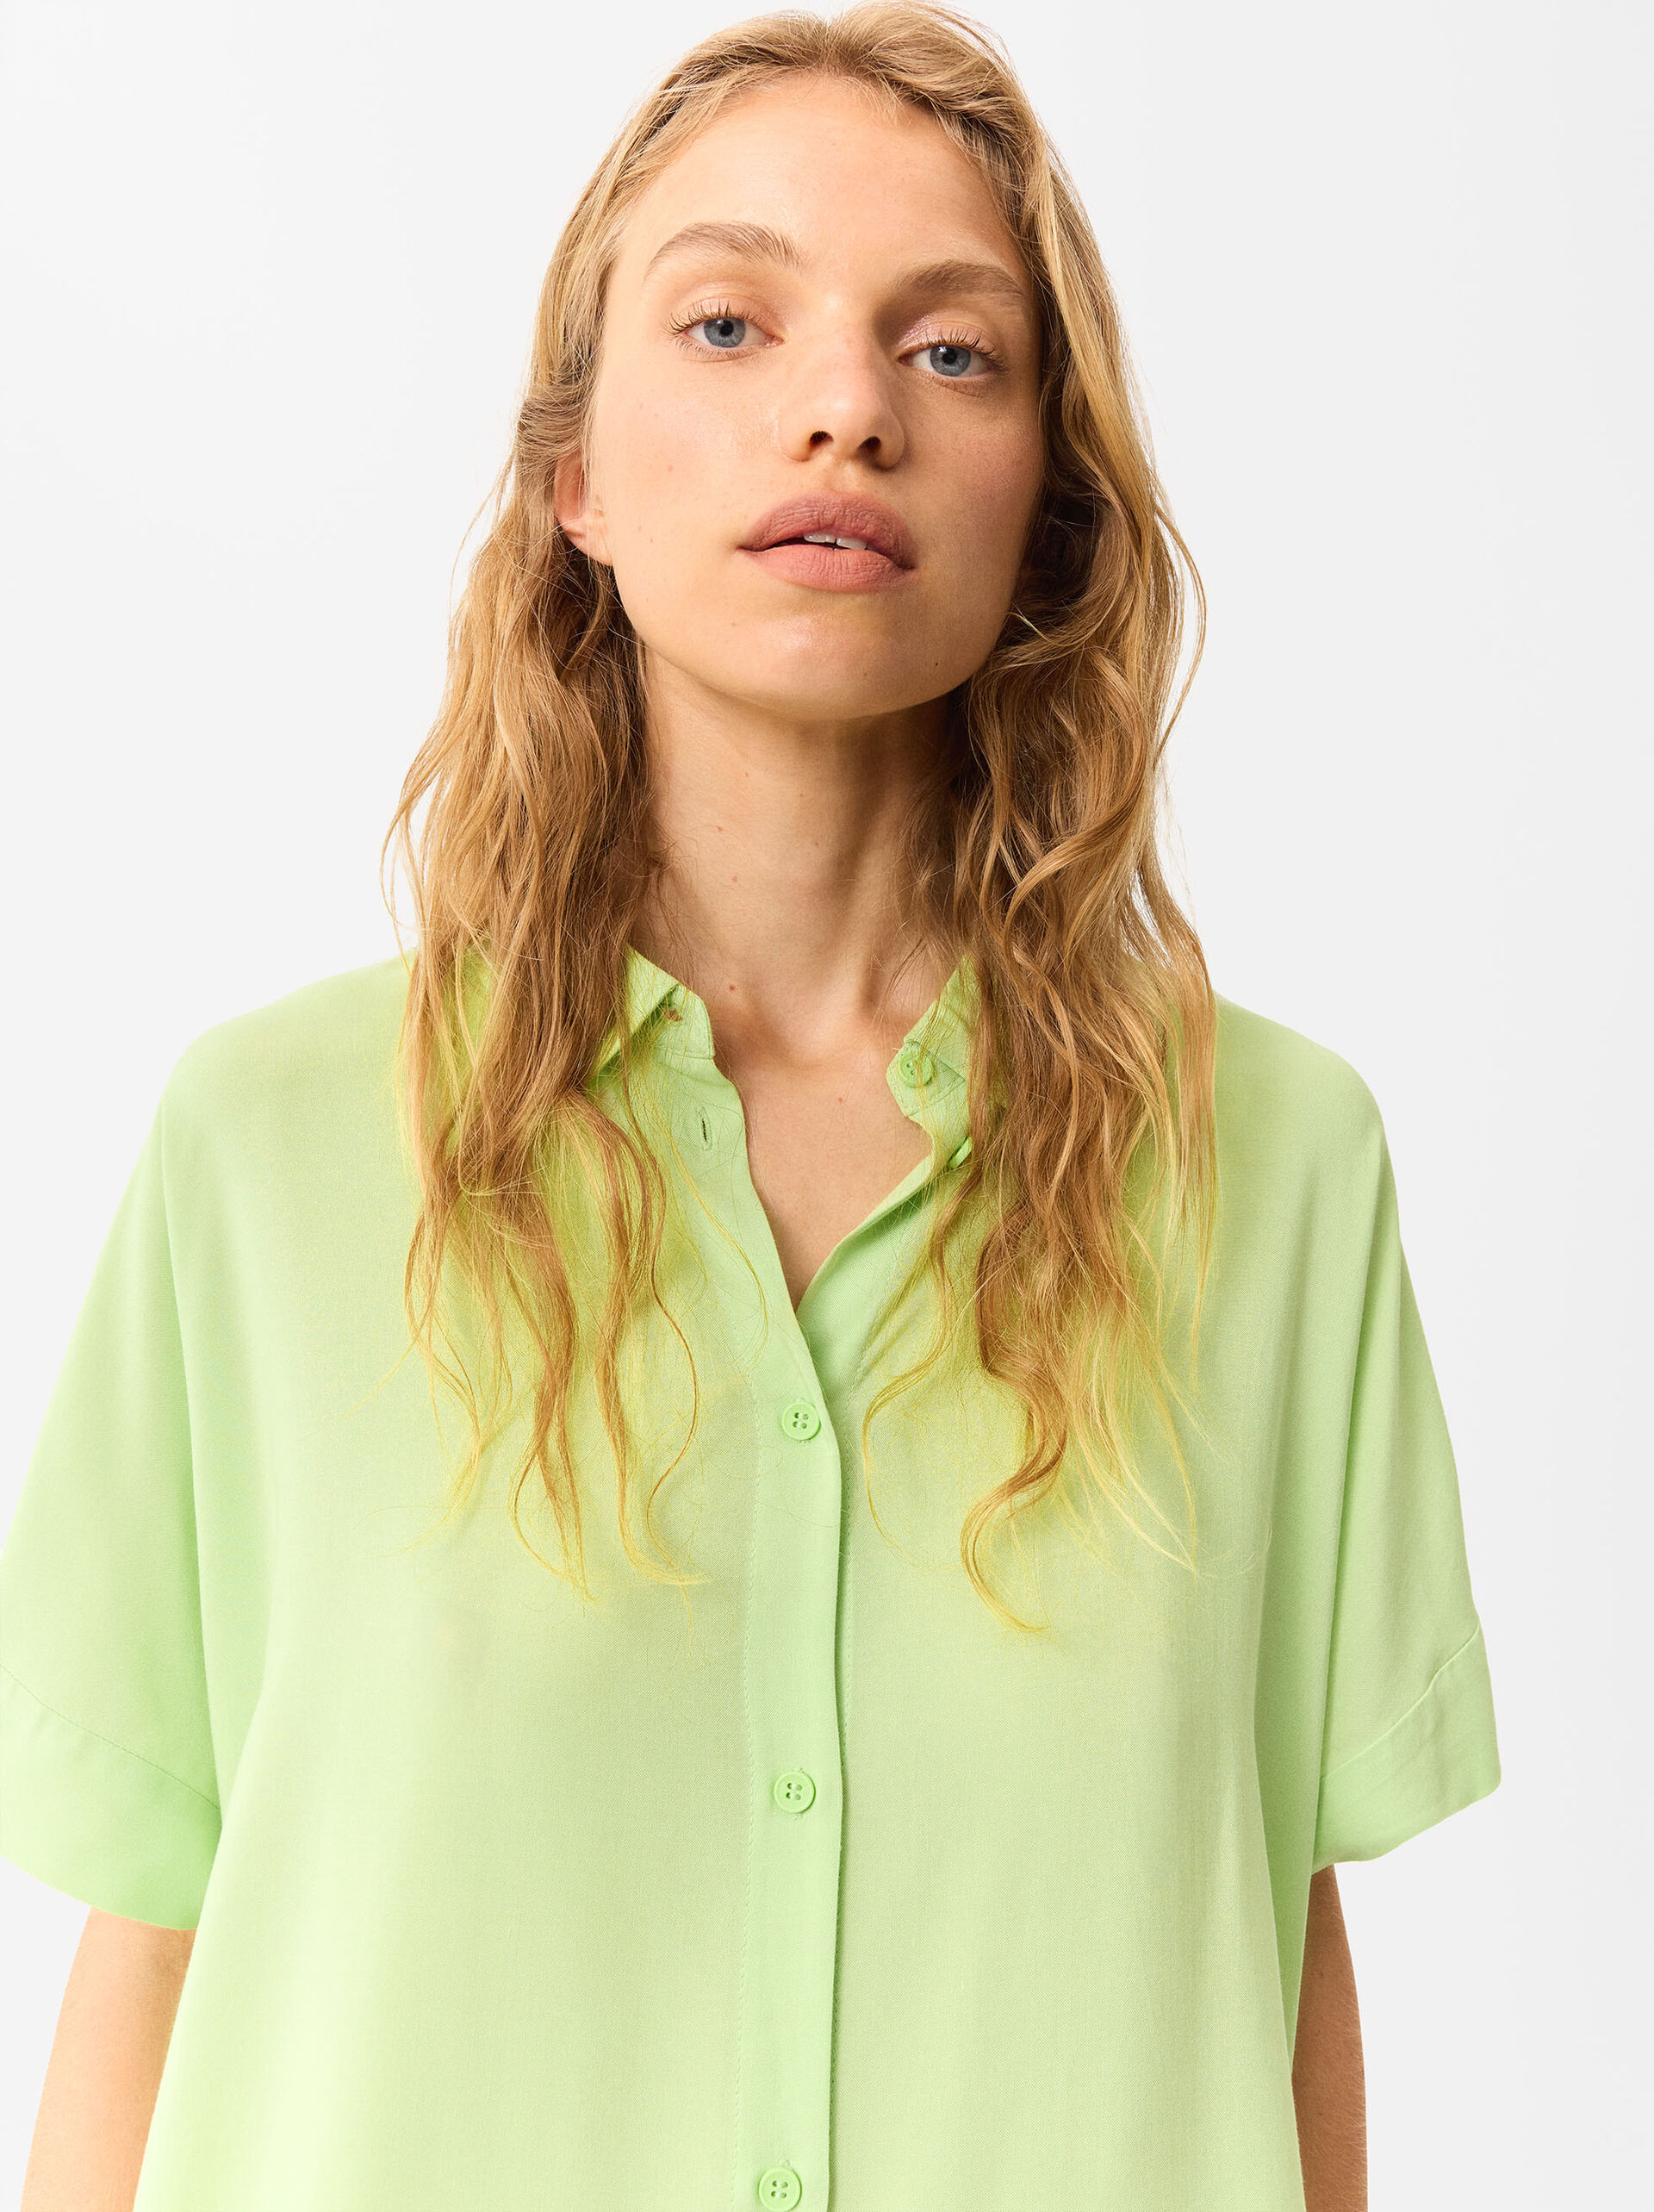 Short-Sleeved Shirt With Buttons image number 4.0